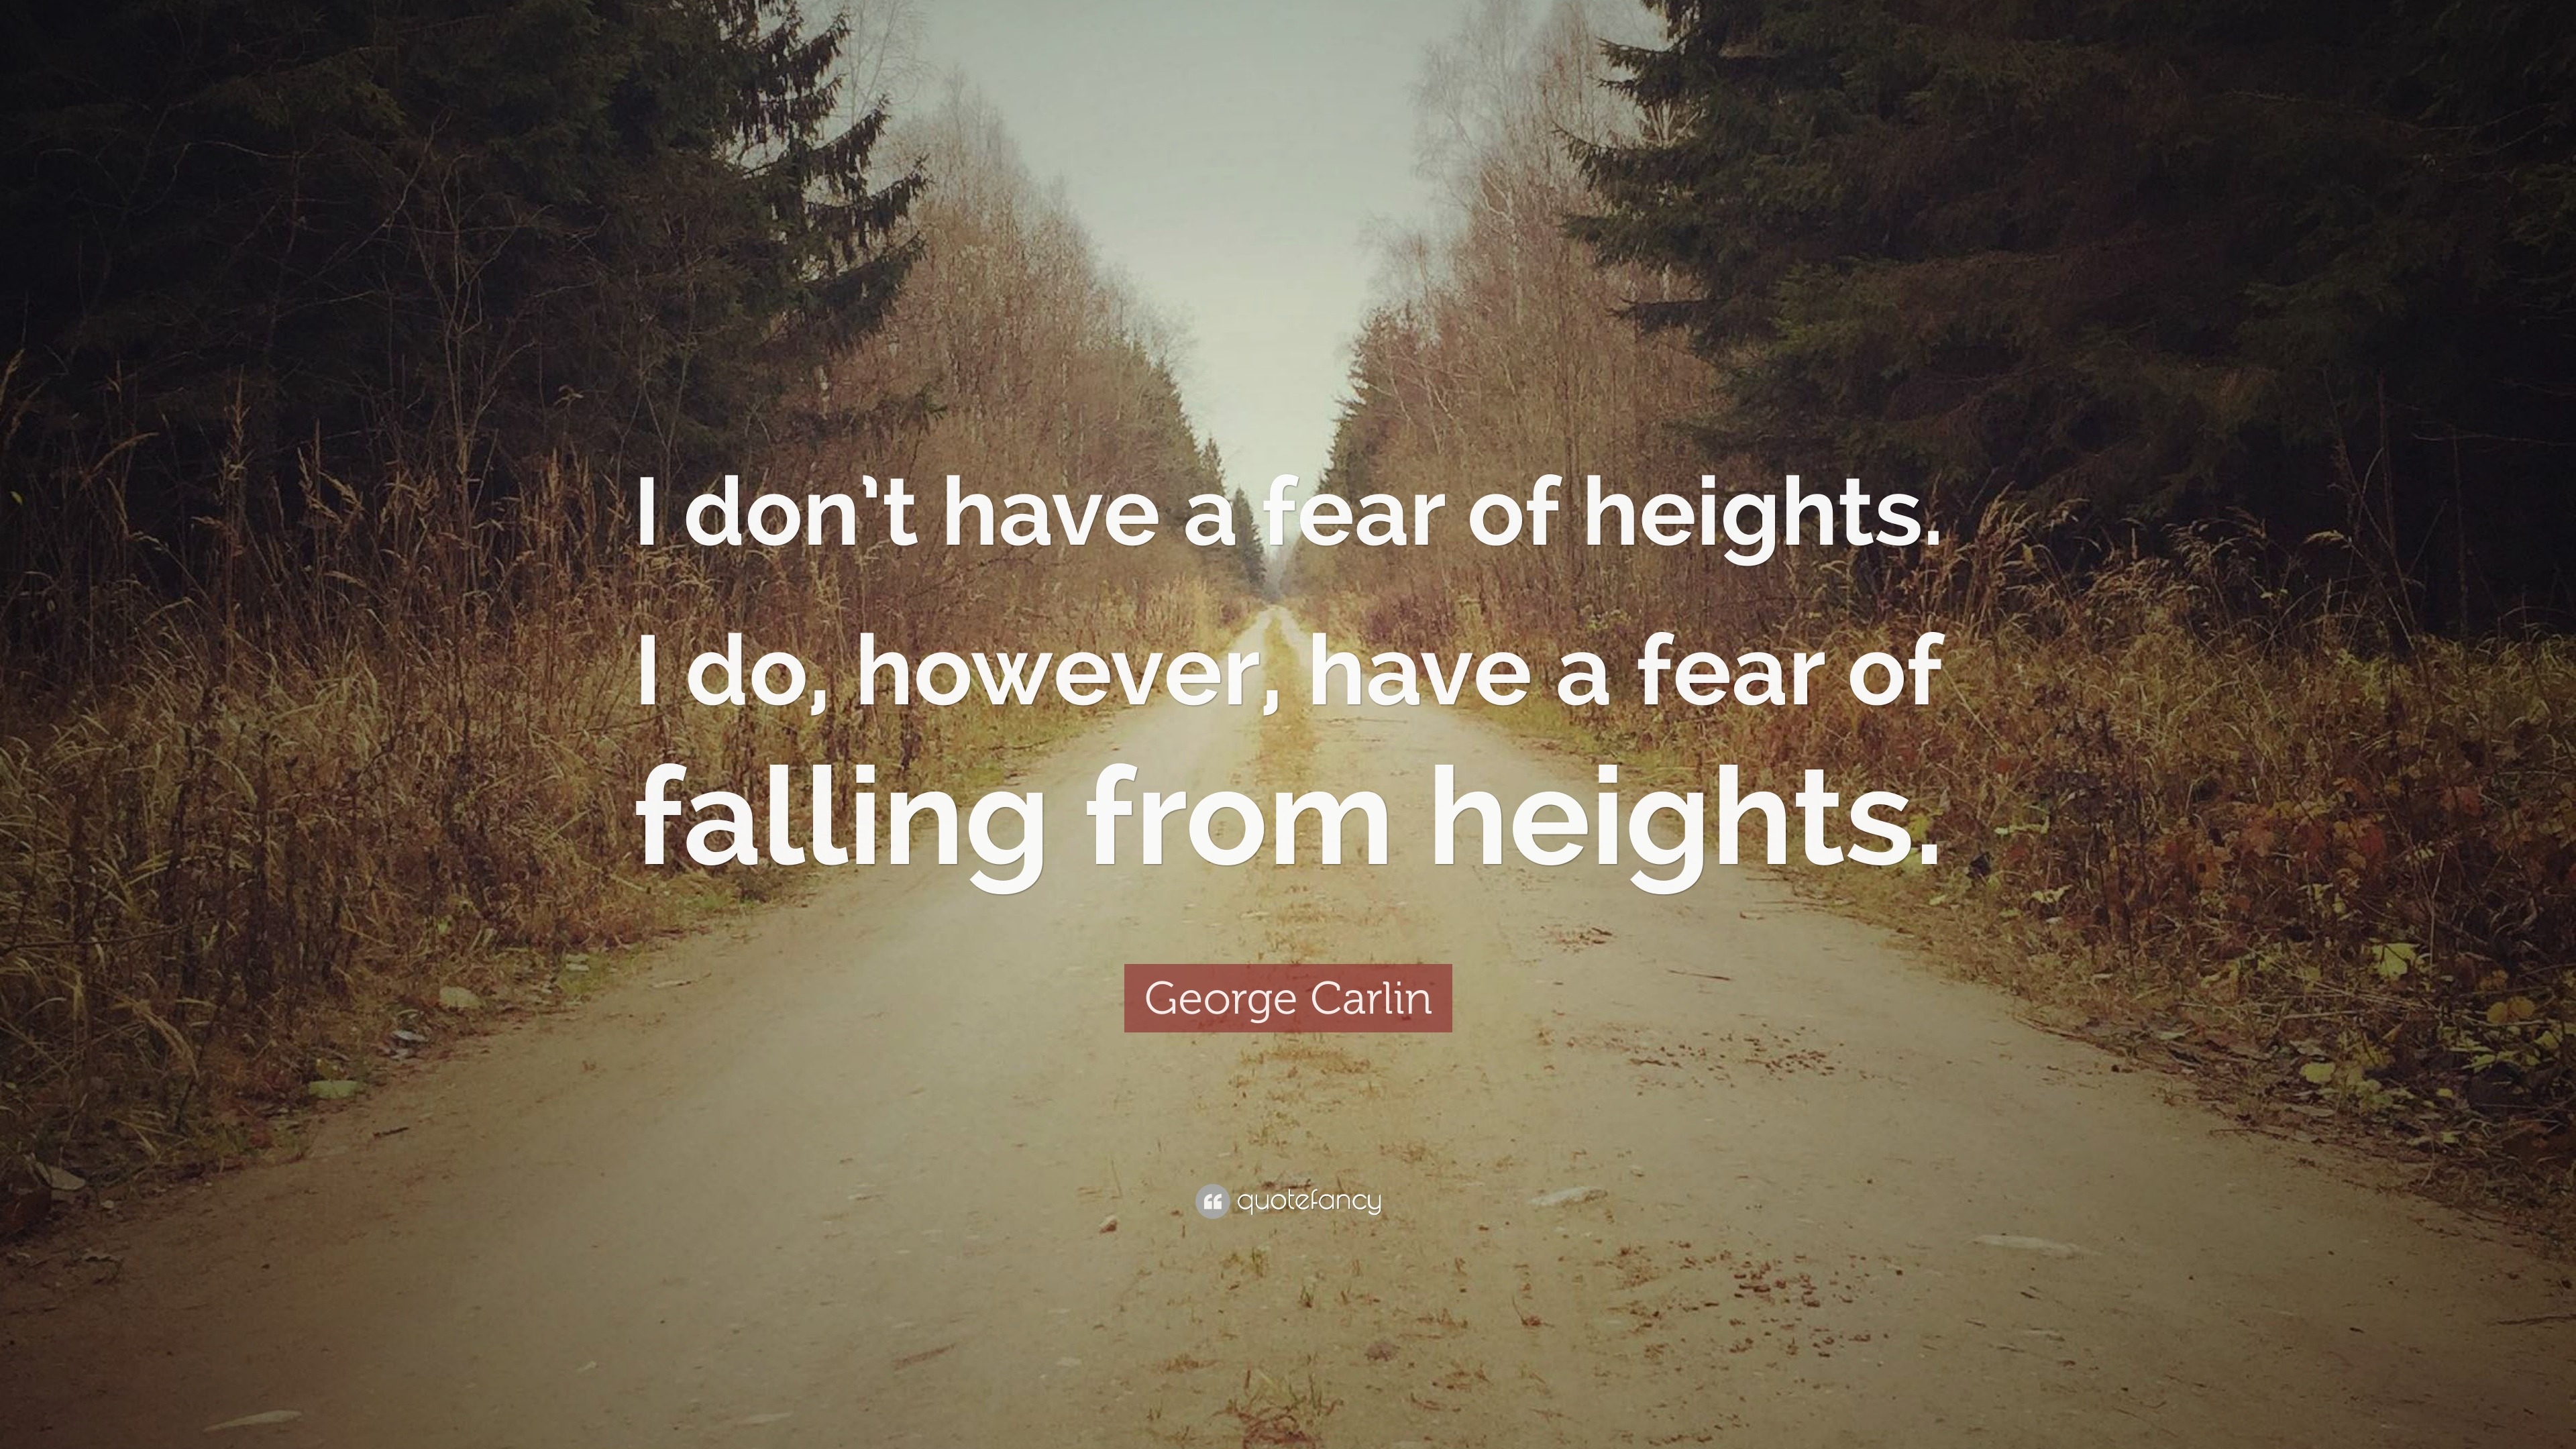 400729 George Carlin Quote I don t have a fear of heights I do however